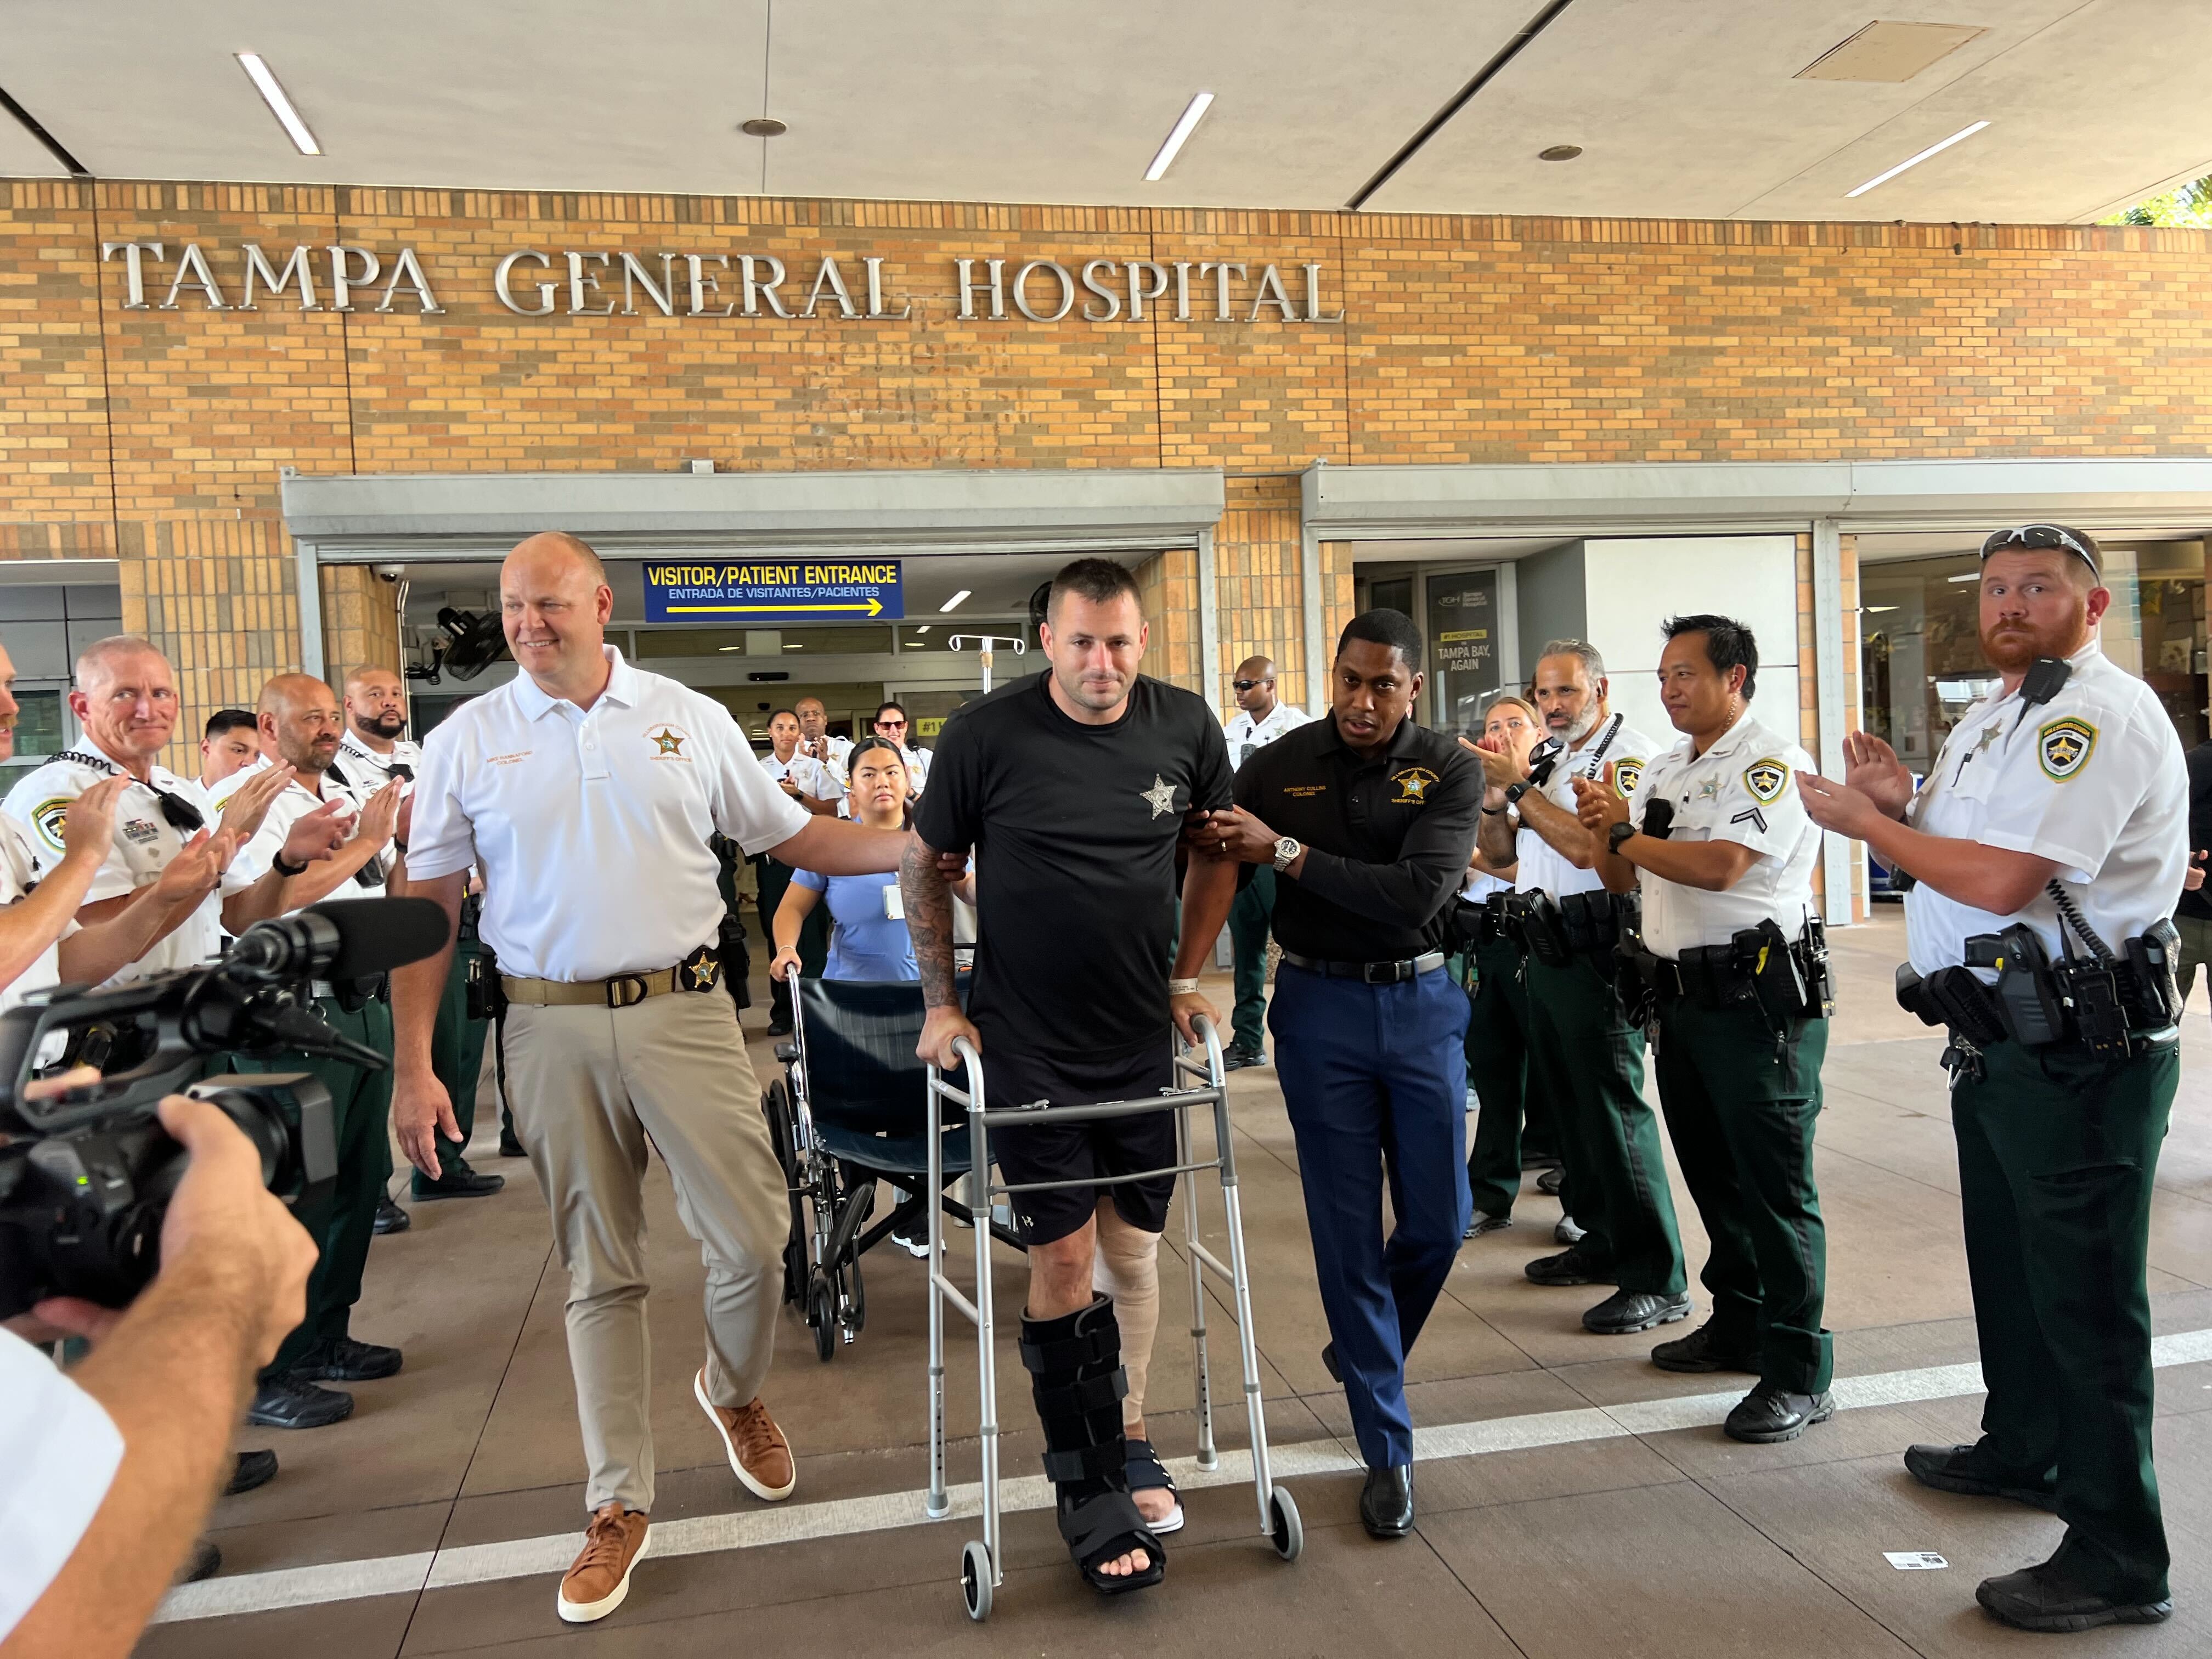 DEPUTY HALL RELEASED FROM HOSPITAL